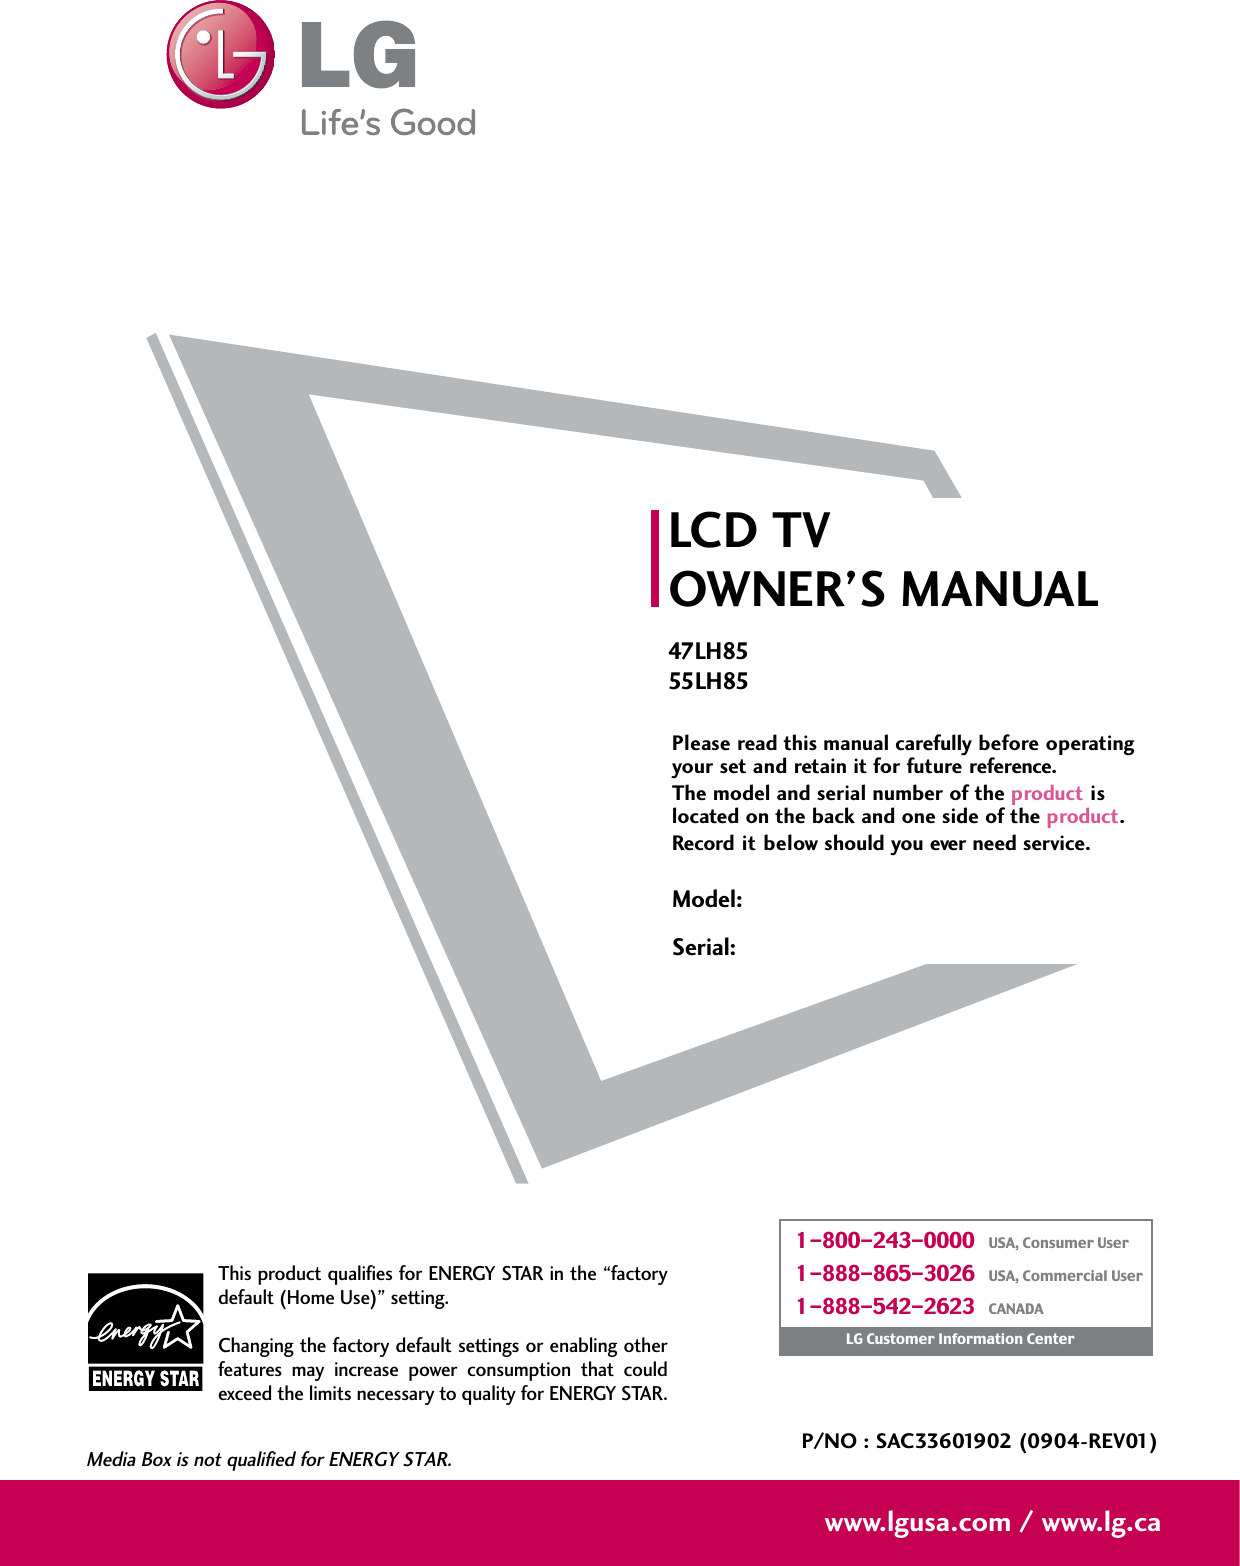 Please read this manual carefully before operatingyour set and retain it for future reference.The model and serial number of the product islocated on the back and one side of the product. Record it below should you ever need service.LCD TVOWNER’S MANUAL47LH8555LH85P/NO : SAC33601902 (0904-REV01)www.lgusa.com / www.lg.caThis product qualifies for ENERGY STAR in the “factorydefault (Home Use)” setting.Changing the factory default settings or enabling otherfeatures  may  increase  power  consumption  that  couldexceed the limits necessary to quality for ENERGY STAR.Media Box is not qualified for ENERGY STAR.Model:Serial:1-800-243-0000   USA, Consumer User1-888-865-3026   USA, Commercial User1-888-542-2623   CANADALG Customer Information Center